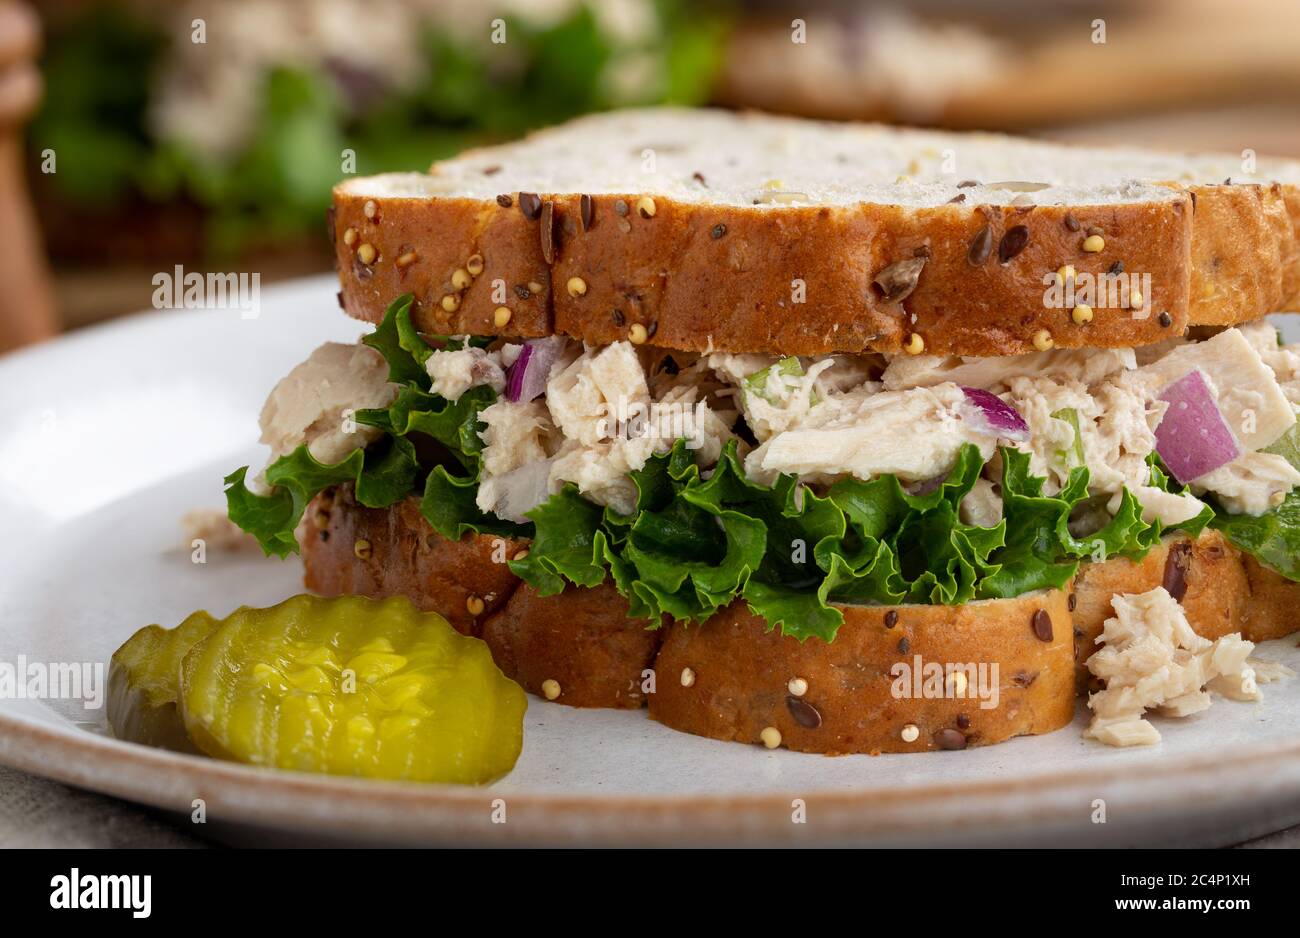 Tuna fish salad and lettuce sandwich on multiseed bread with sliced pickles on a white plate Stock Photo